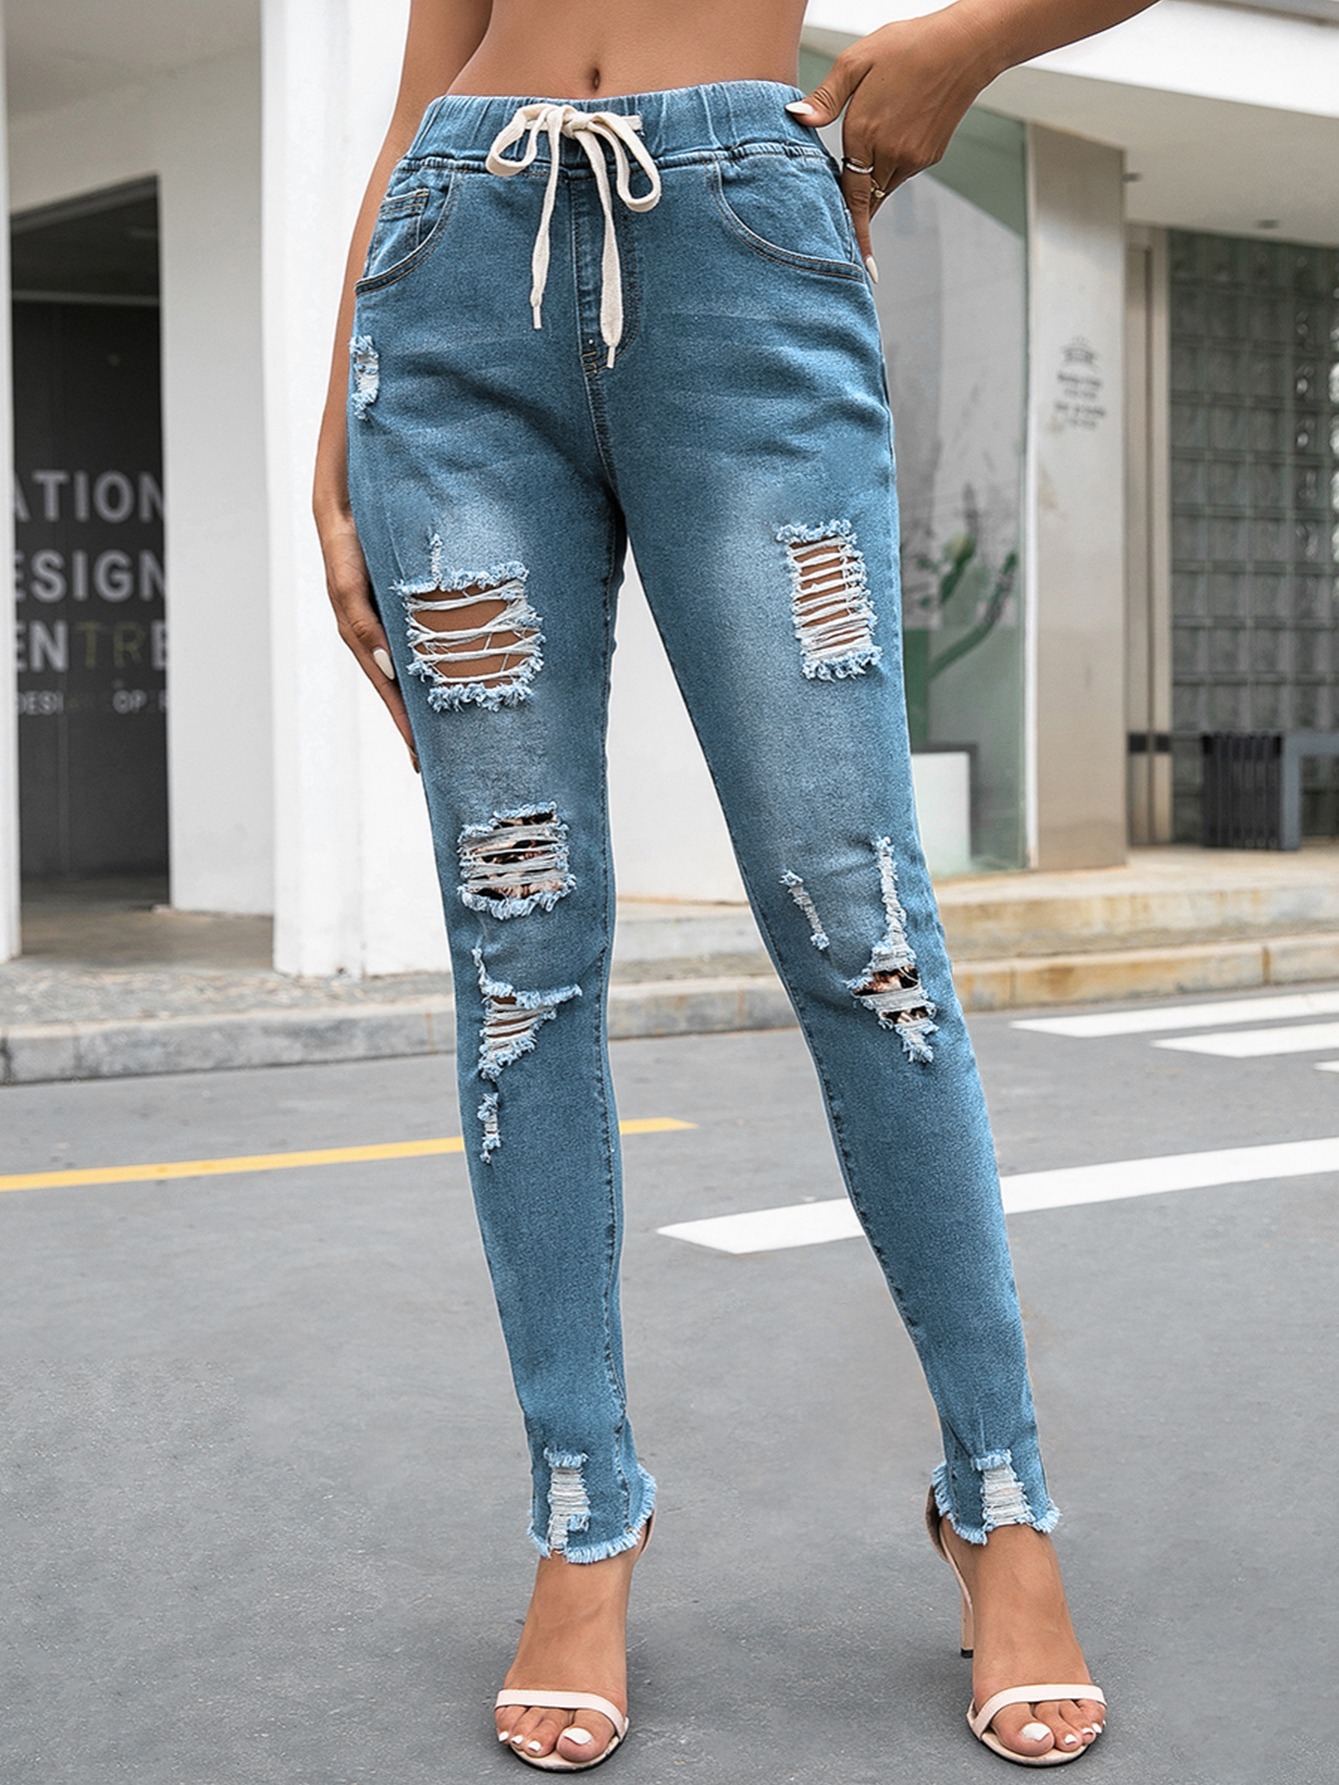 Stretchy Leopard Patchwork Jeans Mid Rise Elastic Waistband Drawstring Hem Jean  Pants Casual Trendy Pants Womens Clothing Denim, Check Out Today's Deals  Now